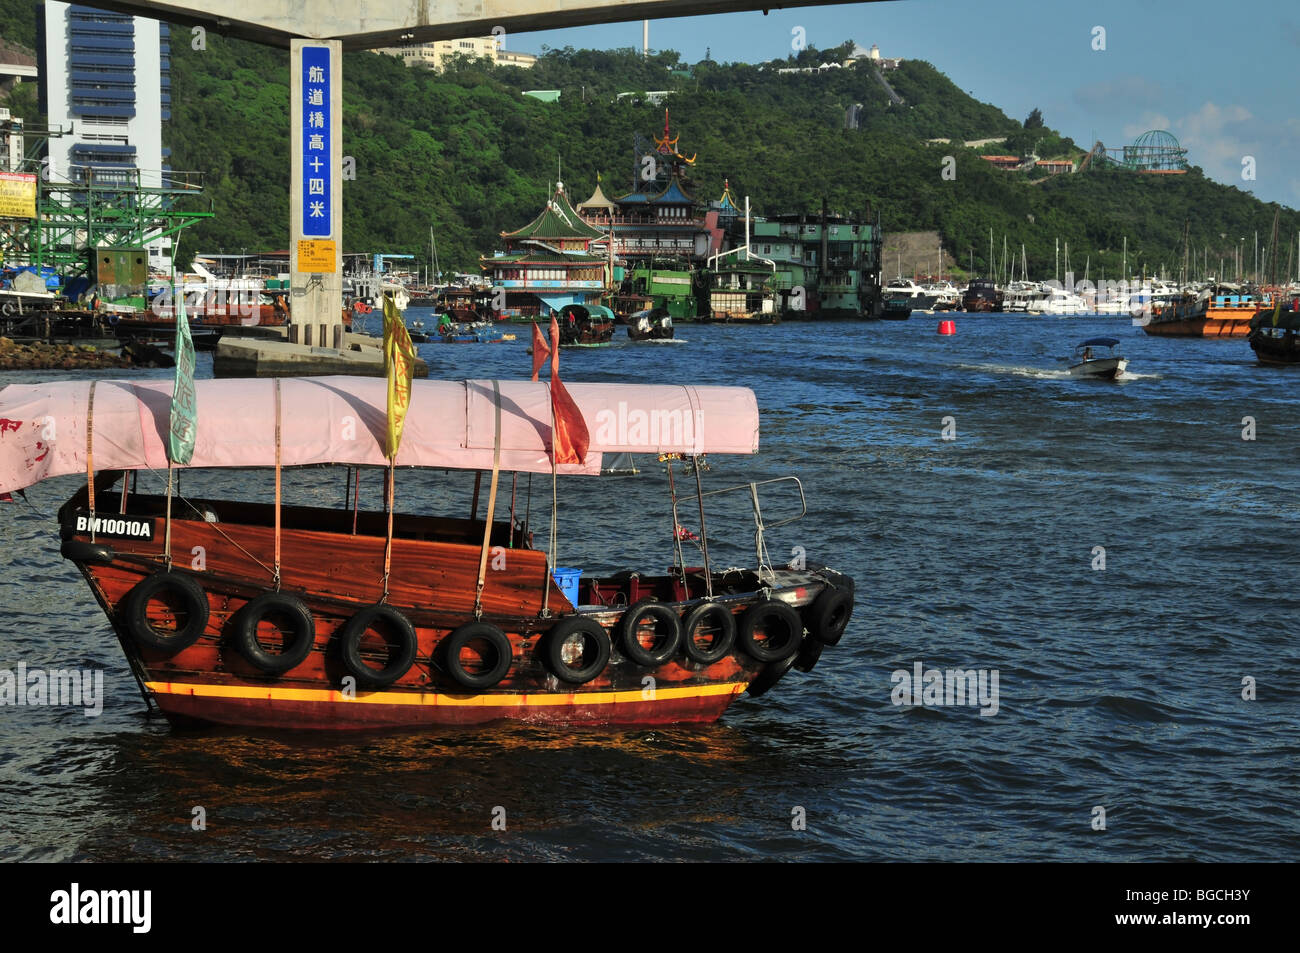 Sampan, pink canopy and flags, moored in front of the Ap Lei Chau Bridge and Jumbo Restaurant, Aberdeen Harbour, Hong Kong Stock Photo